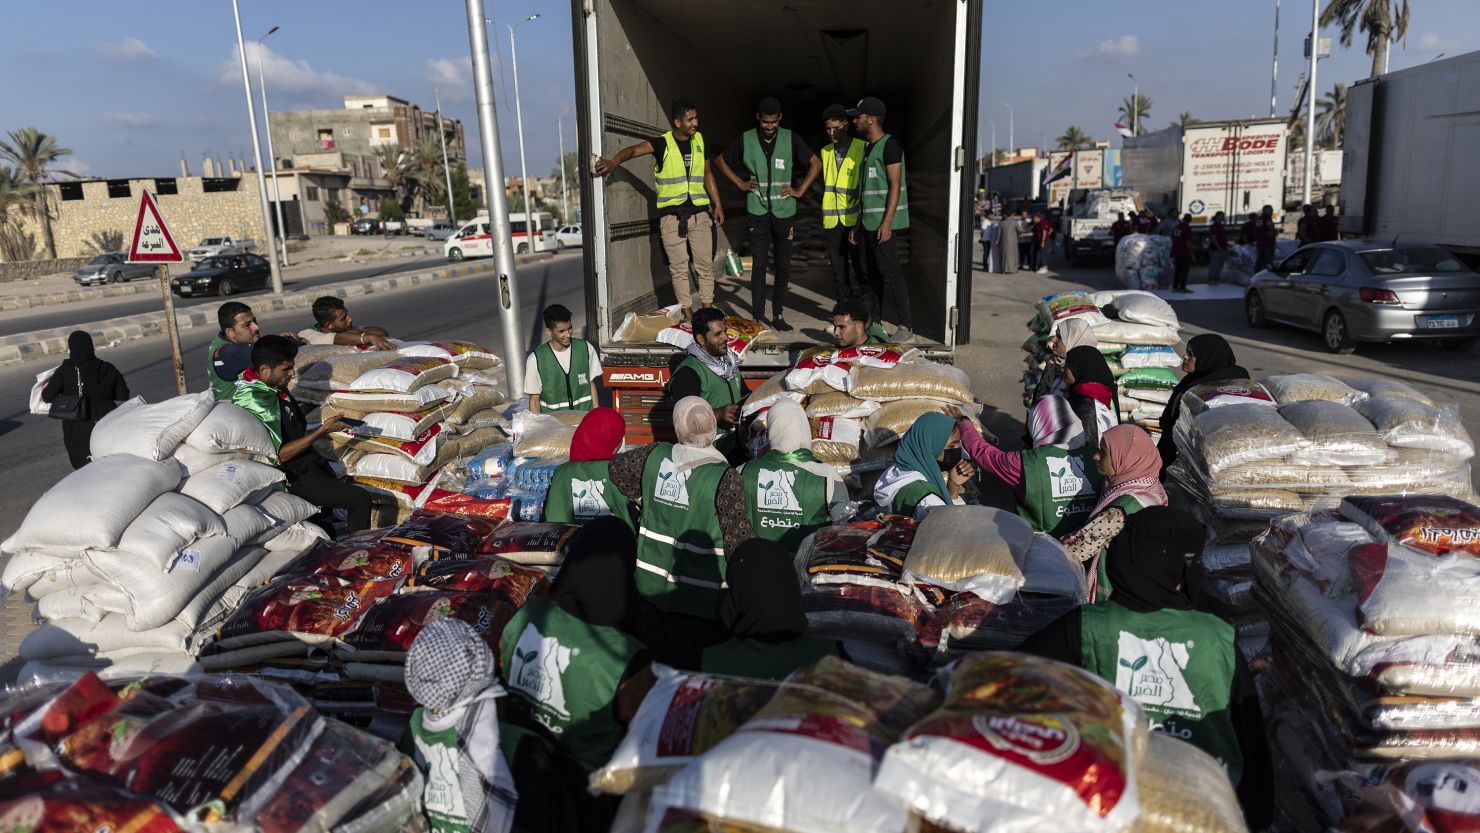 Volunteers load food and supplies onto trucks in an aid convoy for Gaza on October 16, in North Sinai, Egypt.